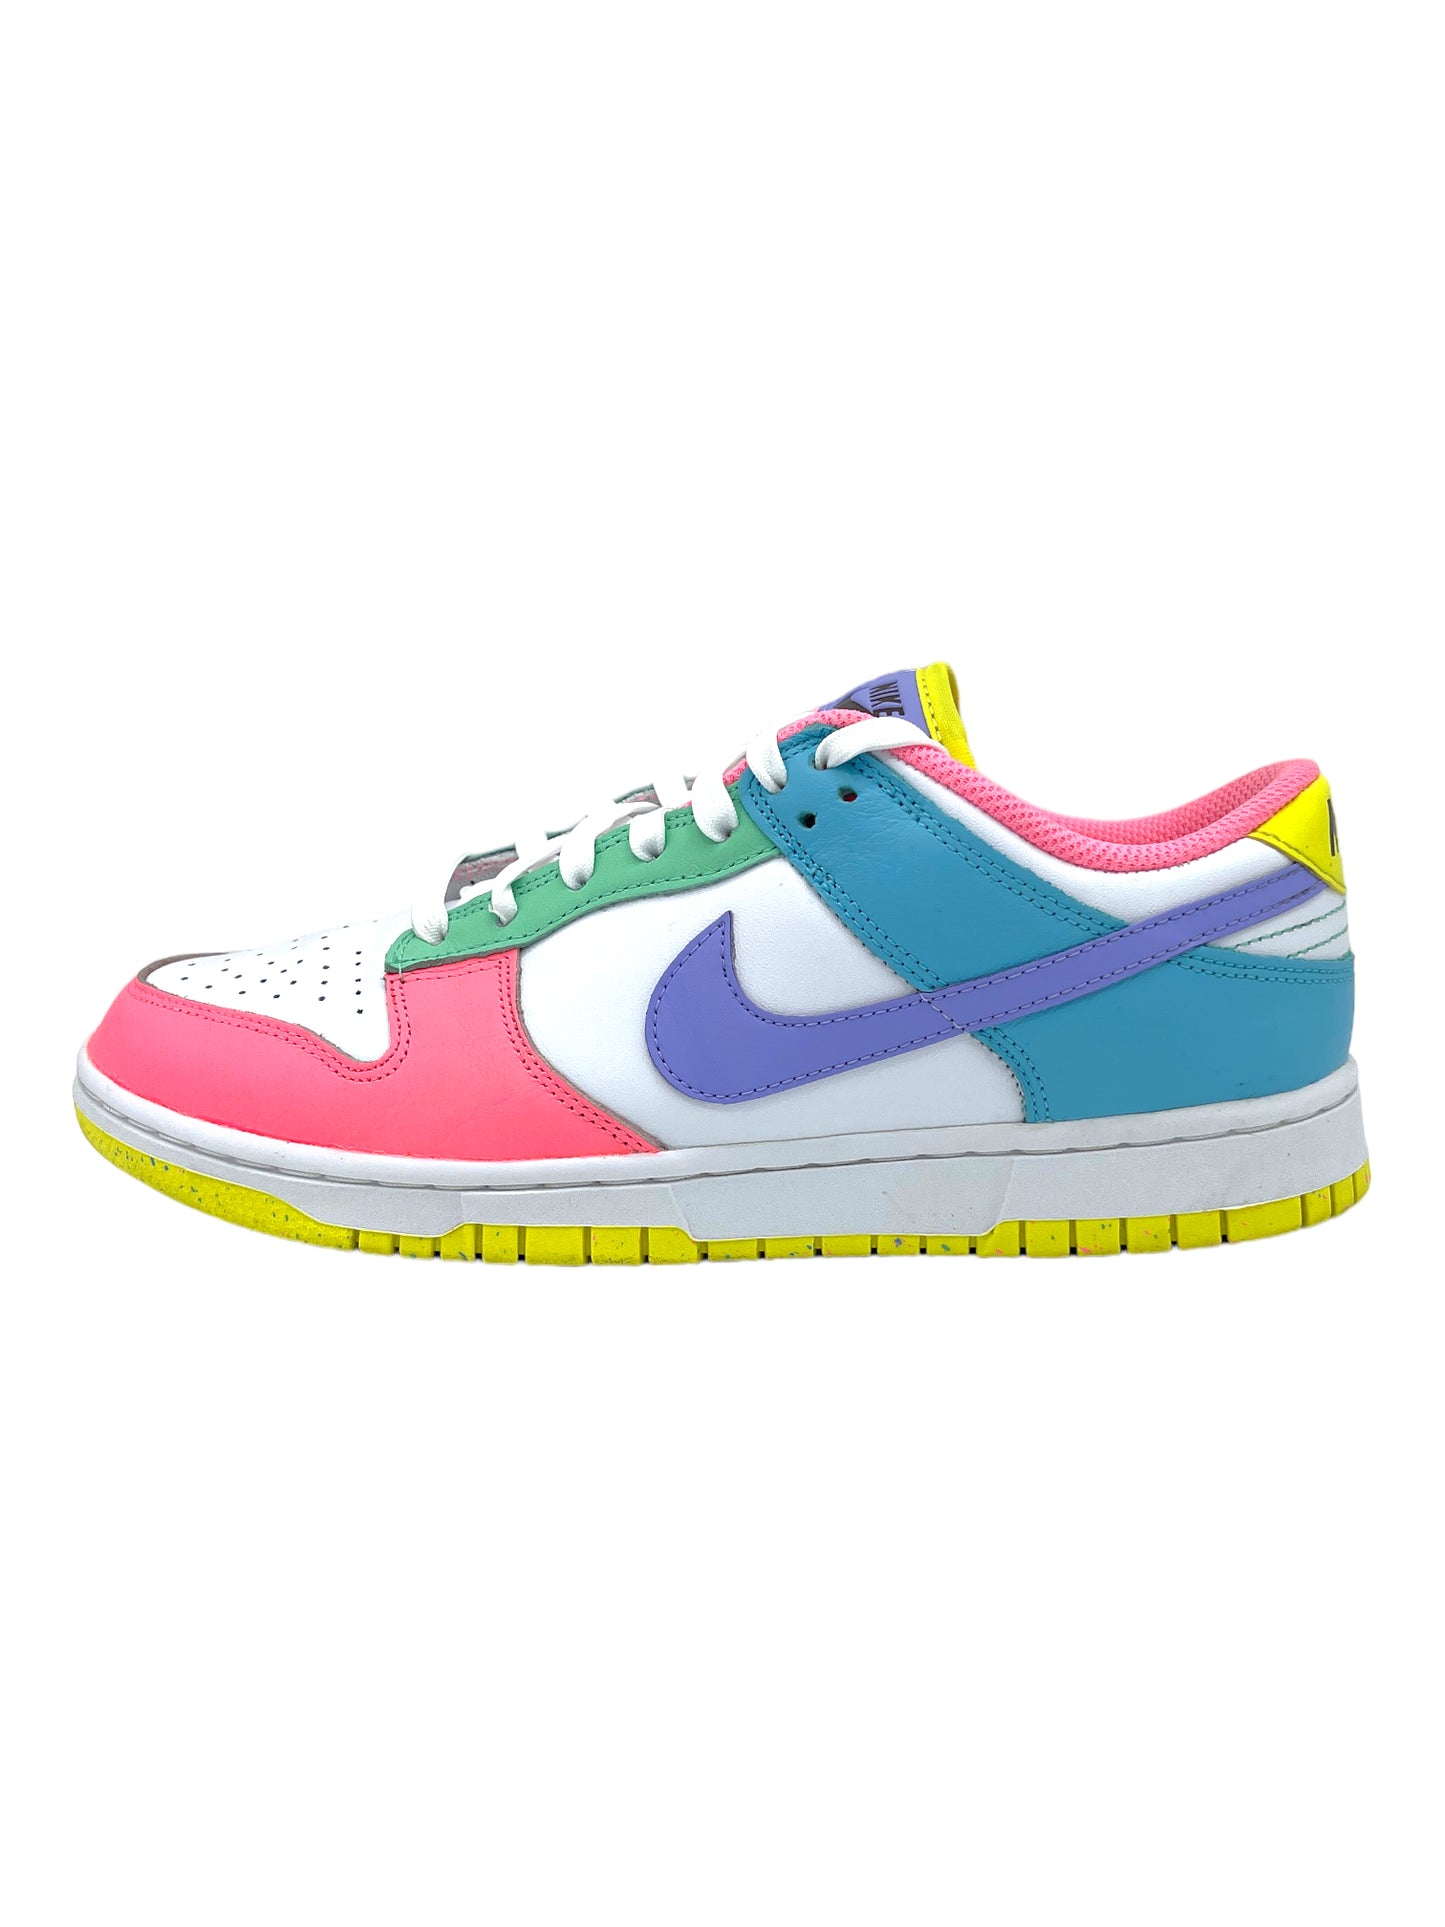 Nike Dunk Low SE Women’s ‘Easter Candy’ Sneakers